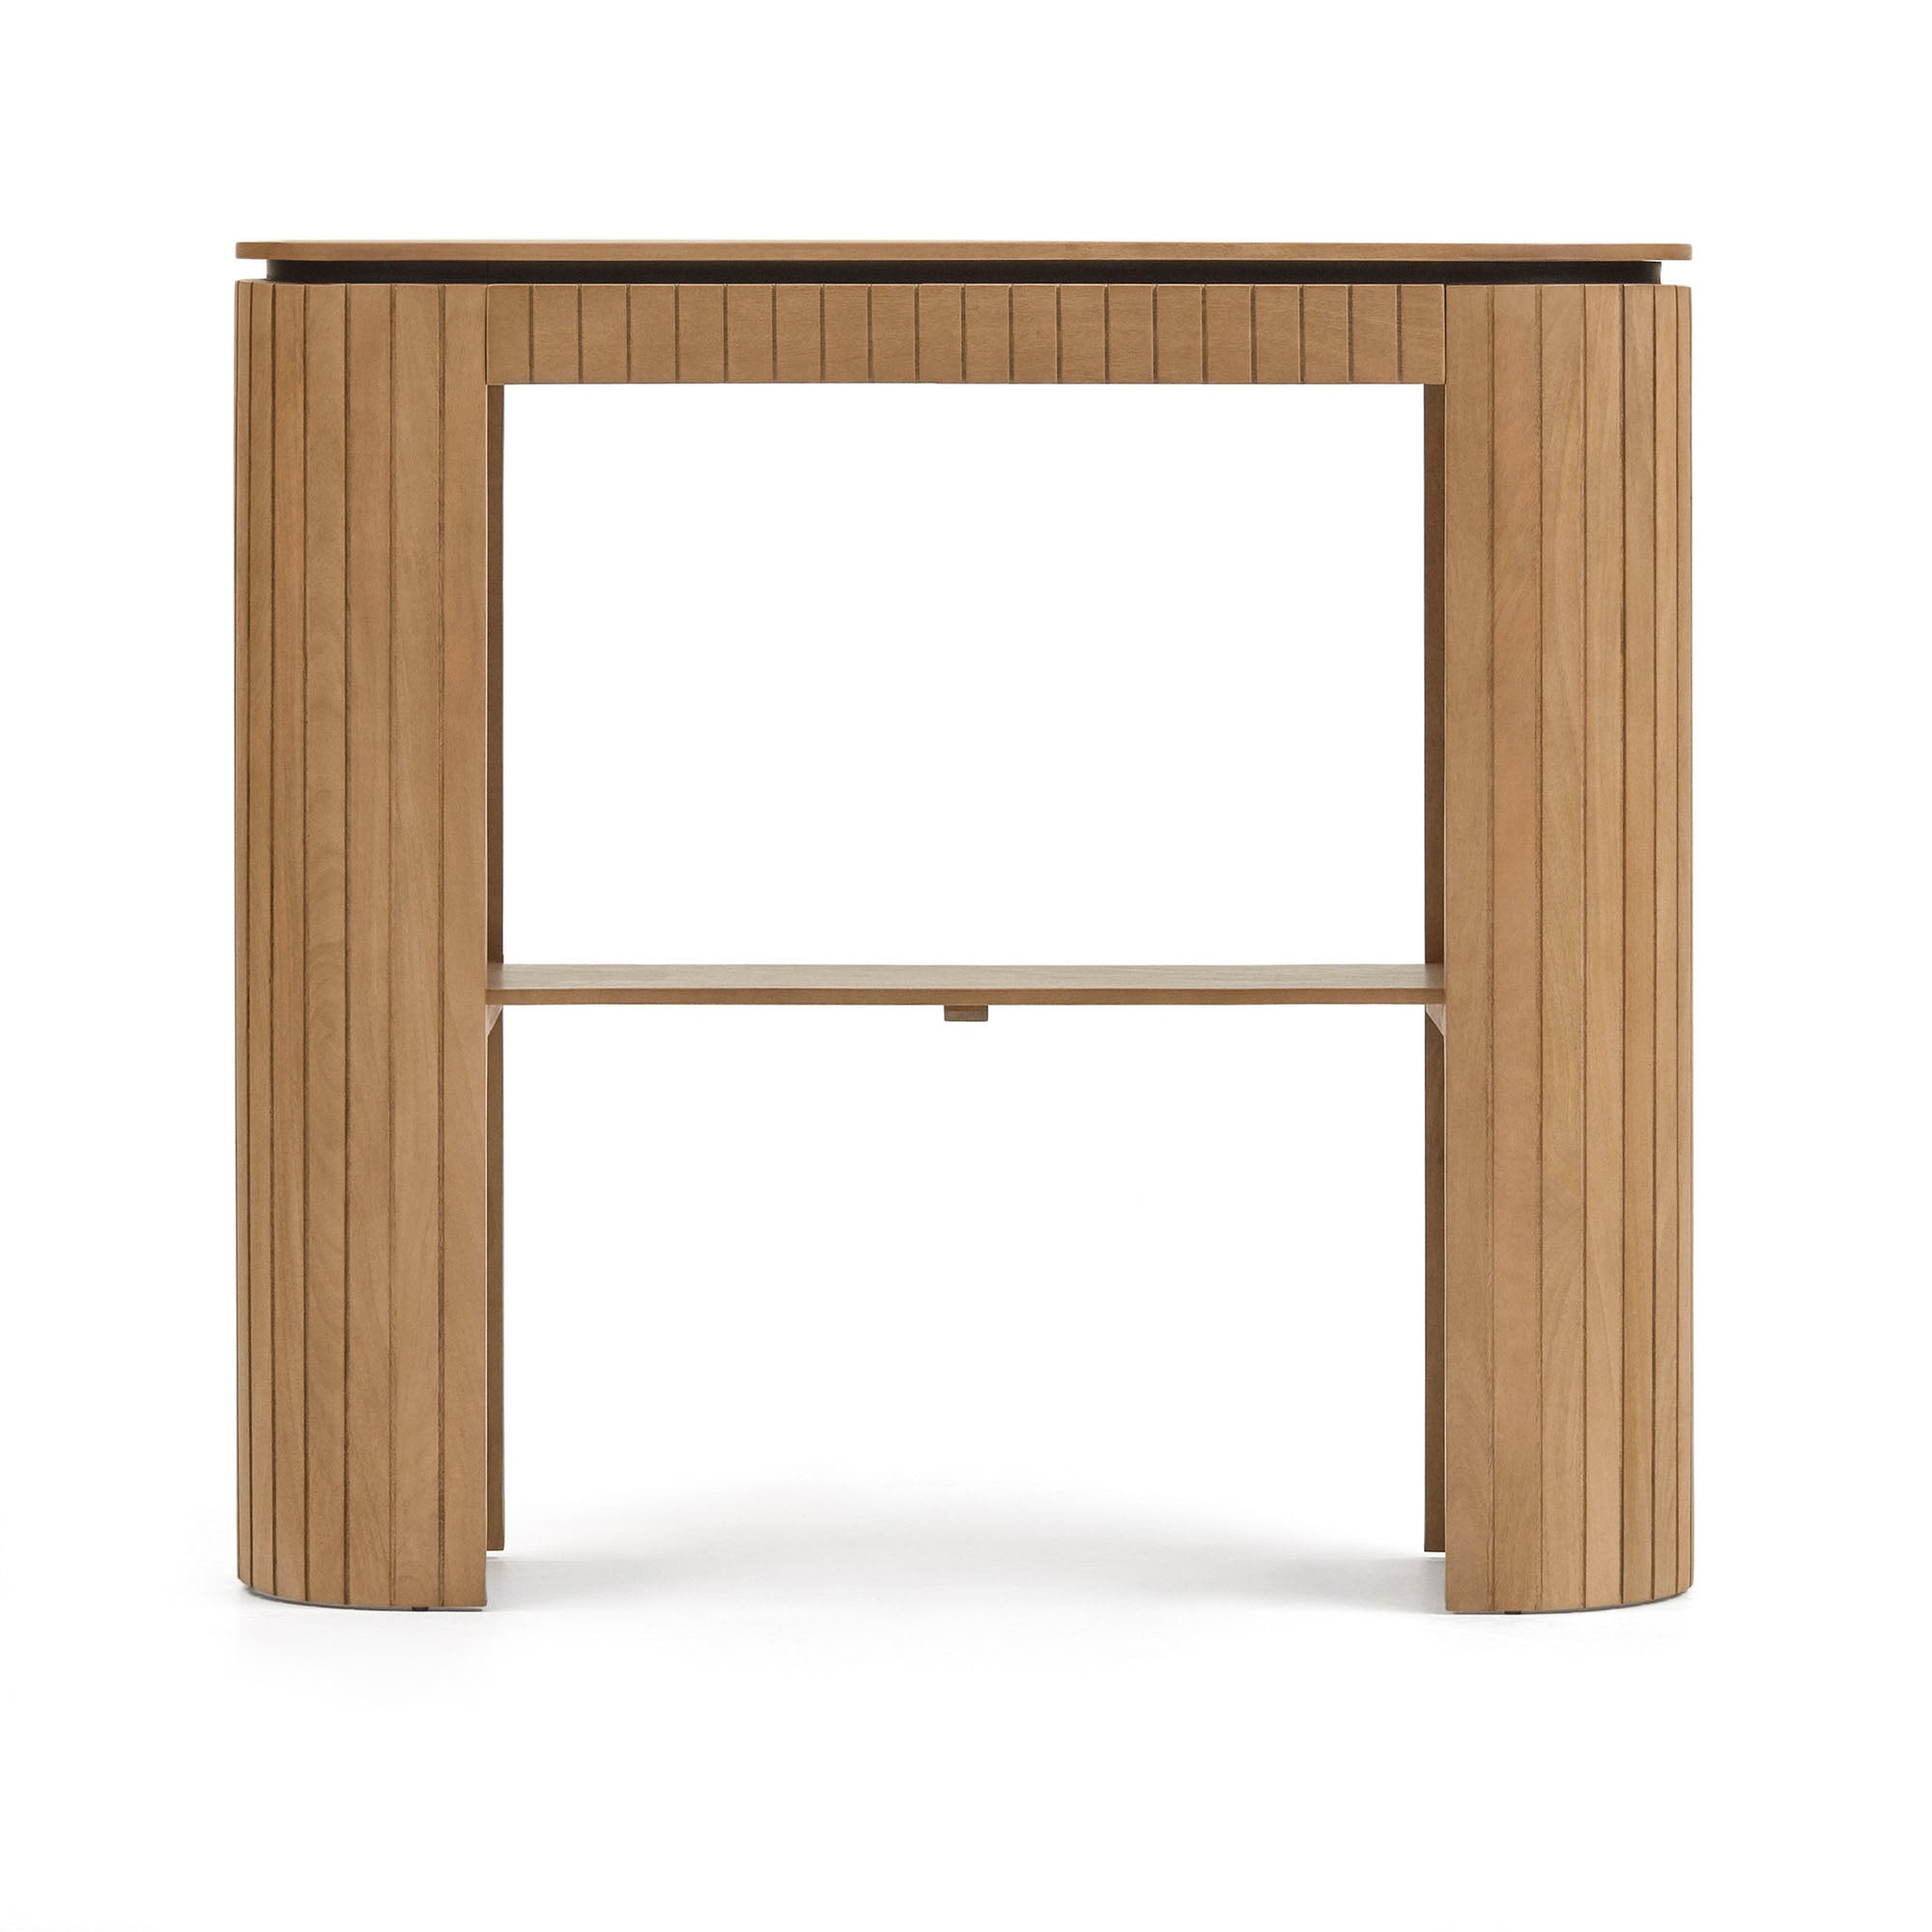 Licia console table with 1 drawer, solid mango wood, 120 x 90 cm